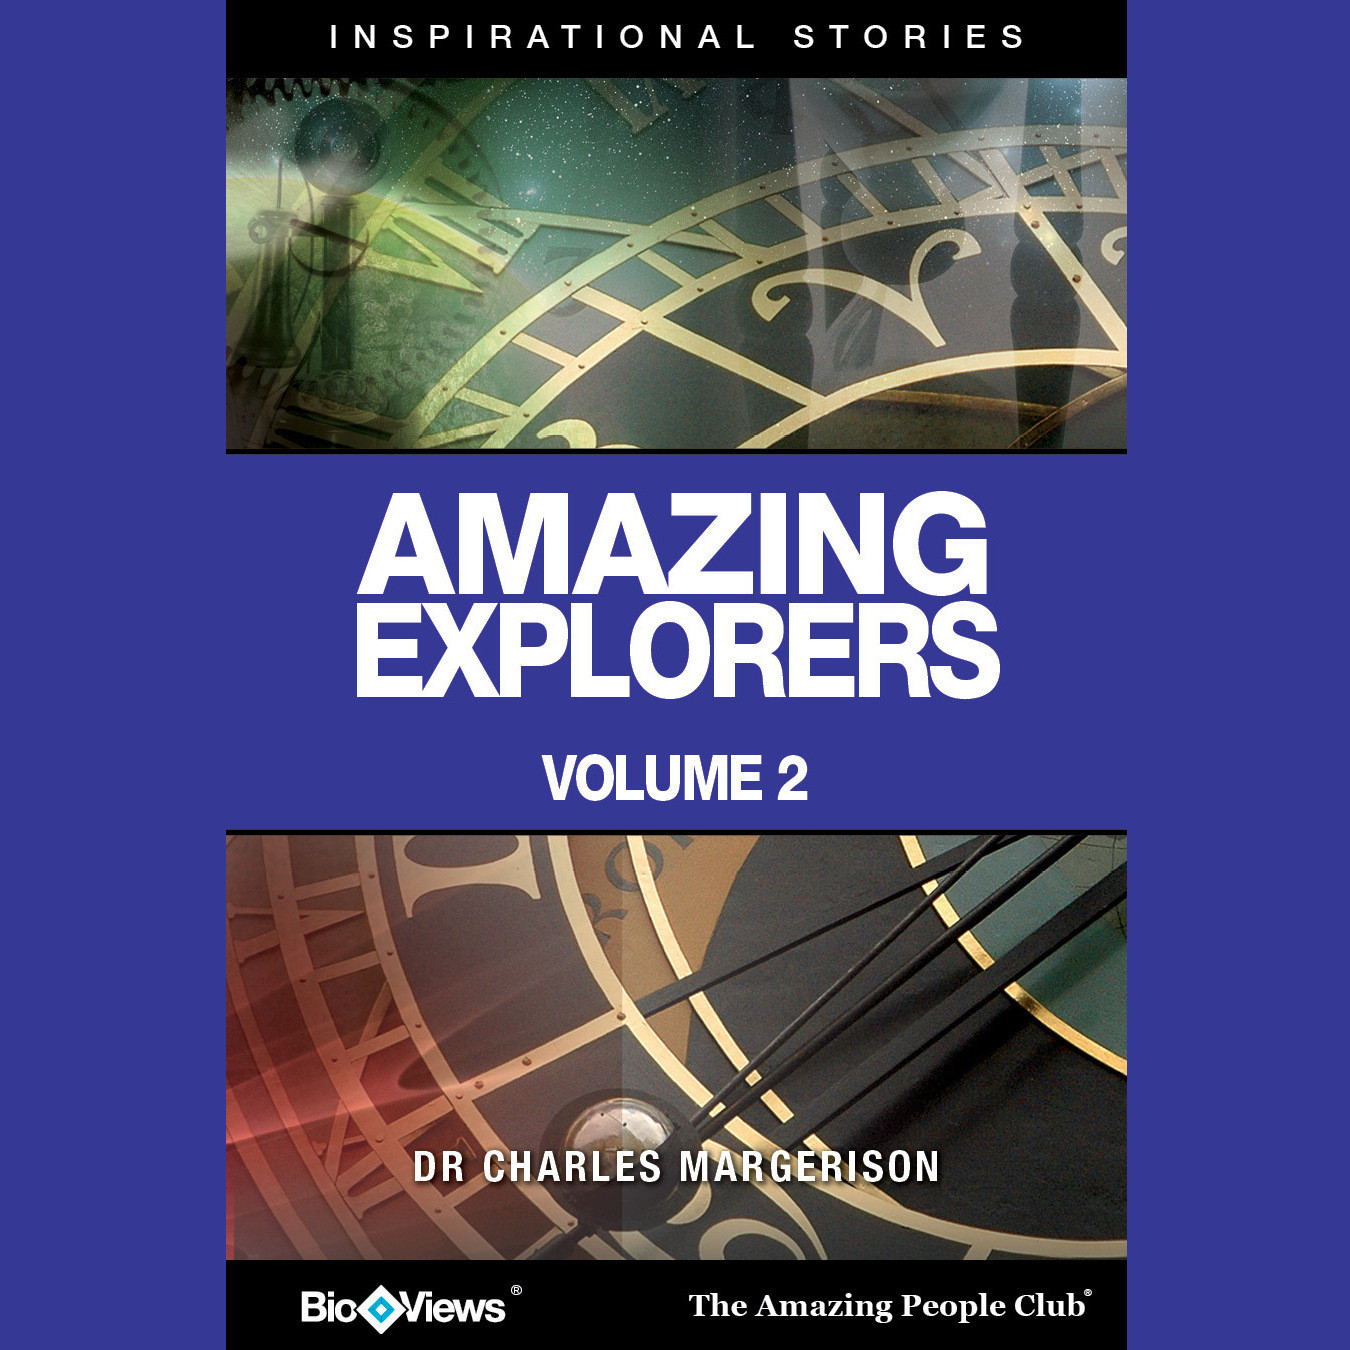 Amazing Explorers, Vol. 2: Inspirational Stories Audiobook, by Charles Margerison